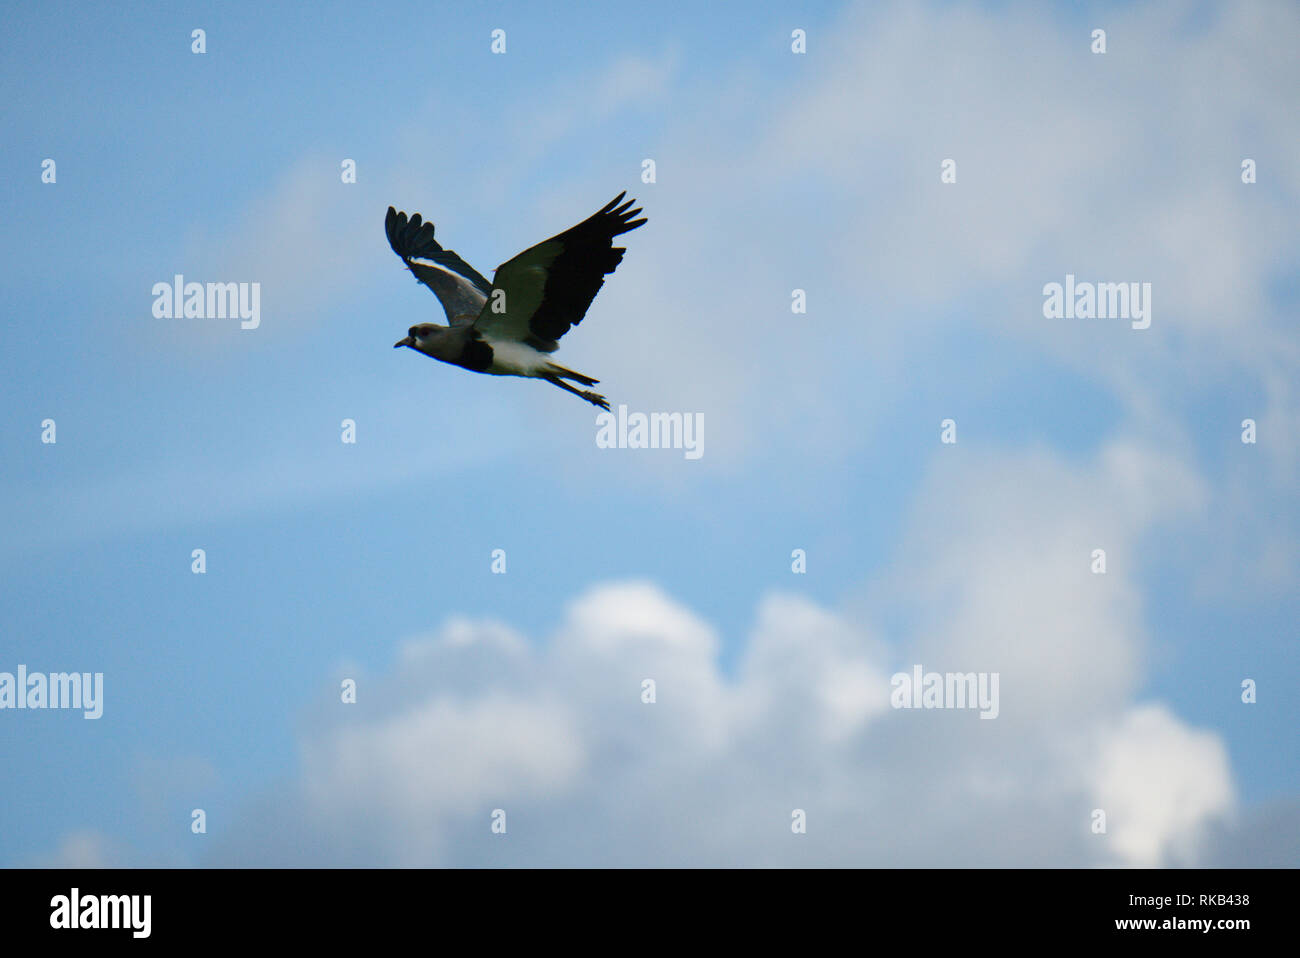 A bird flying in the blue sky with clouds. Stock Photo